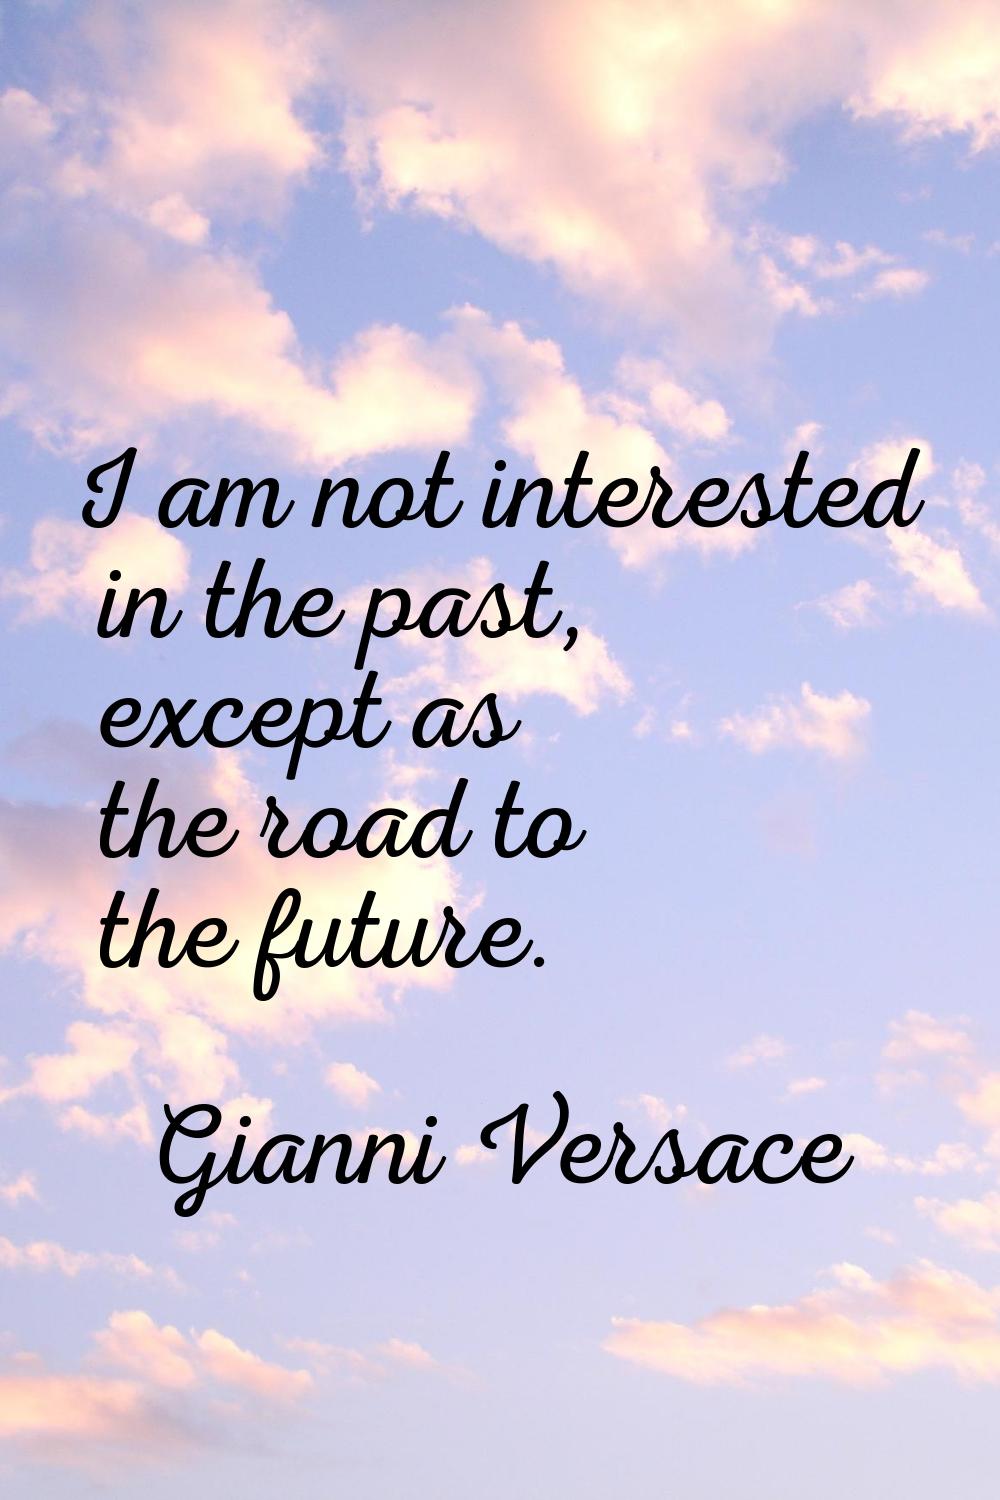 I am not interested in the past, except as the road to the future.